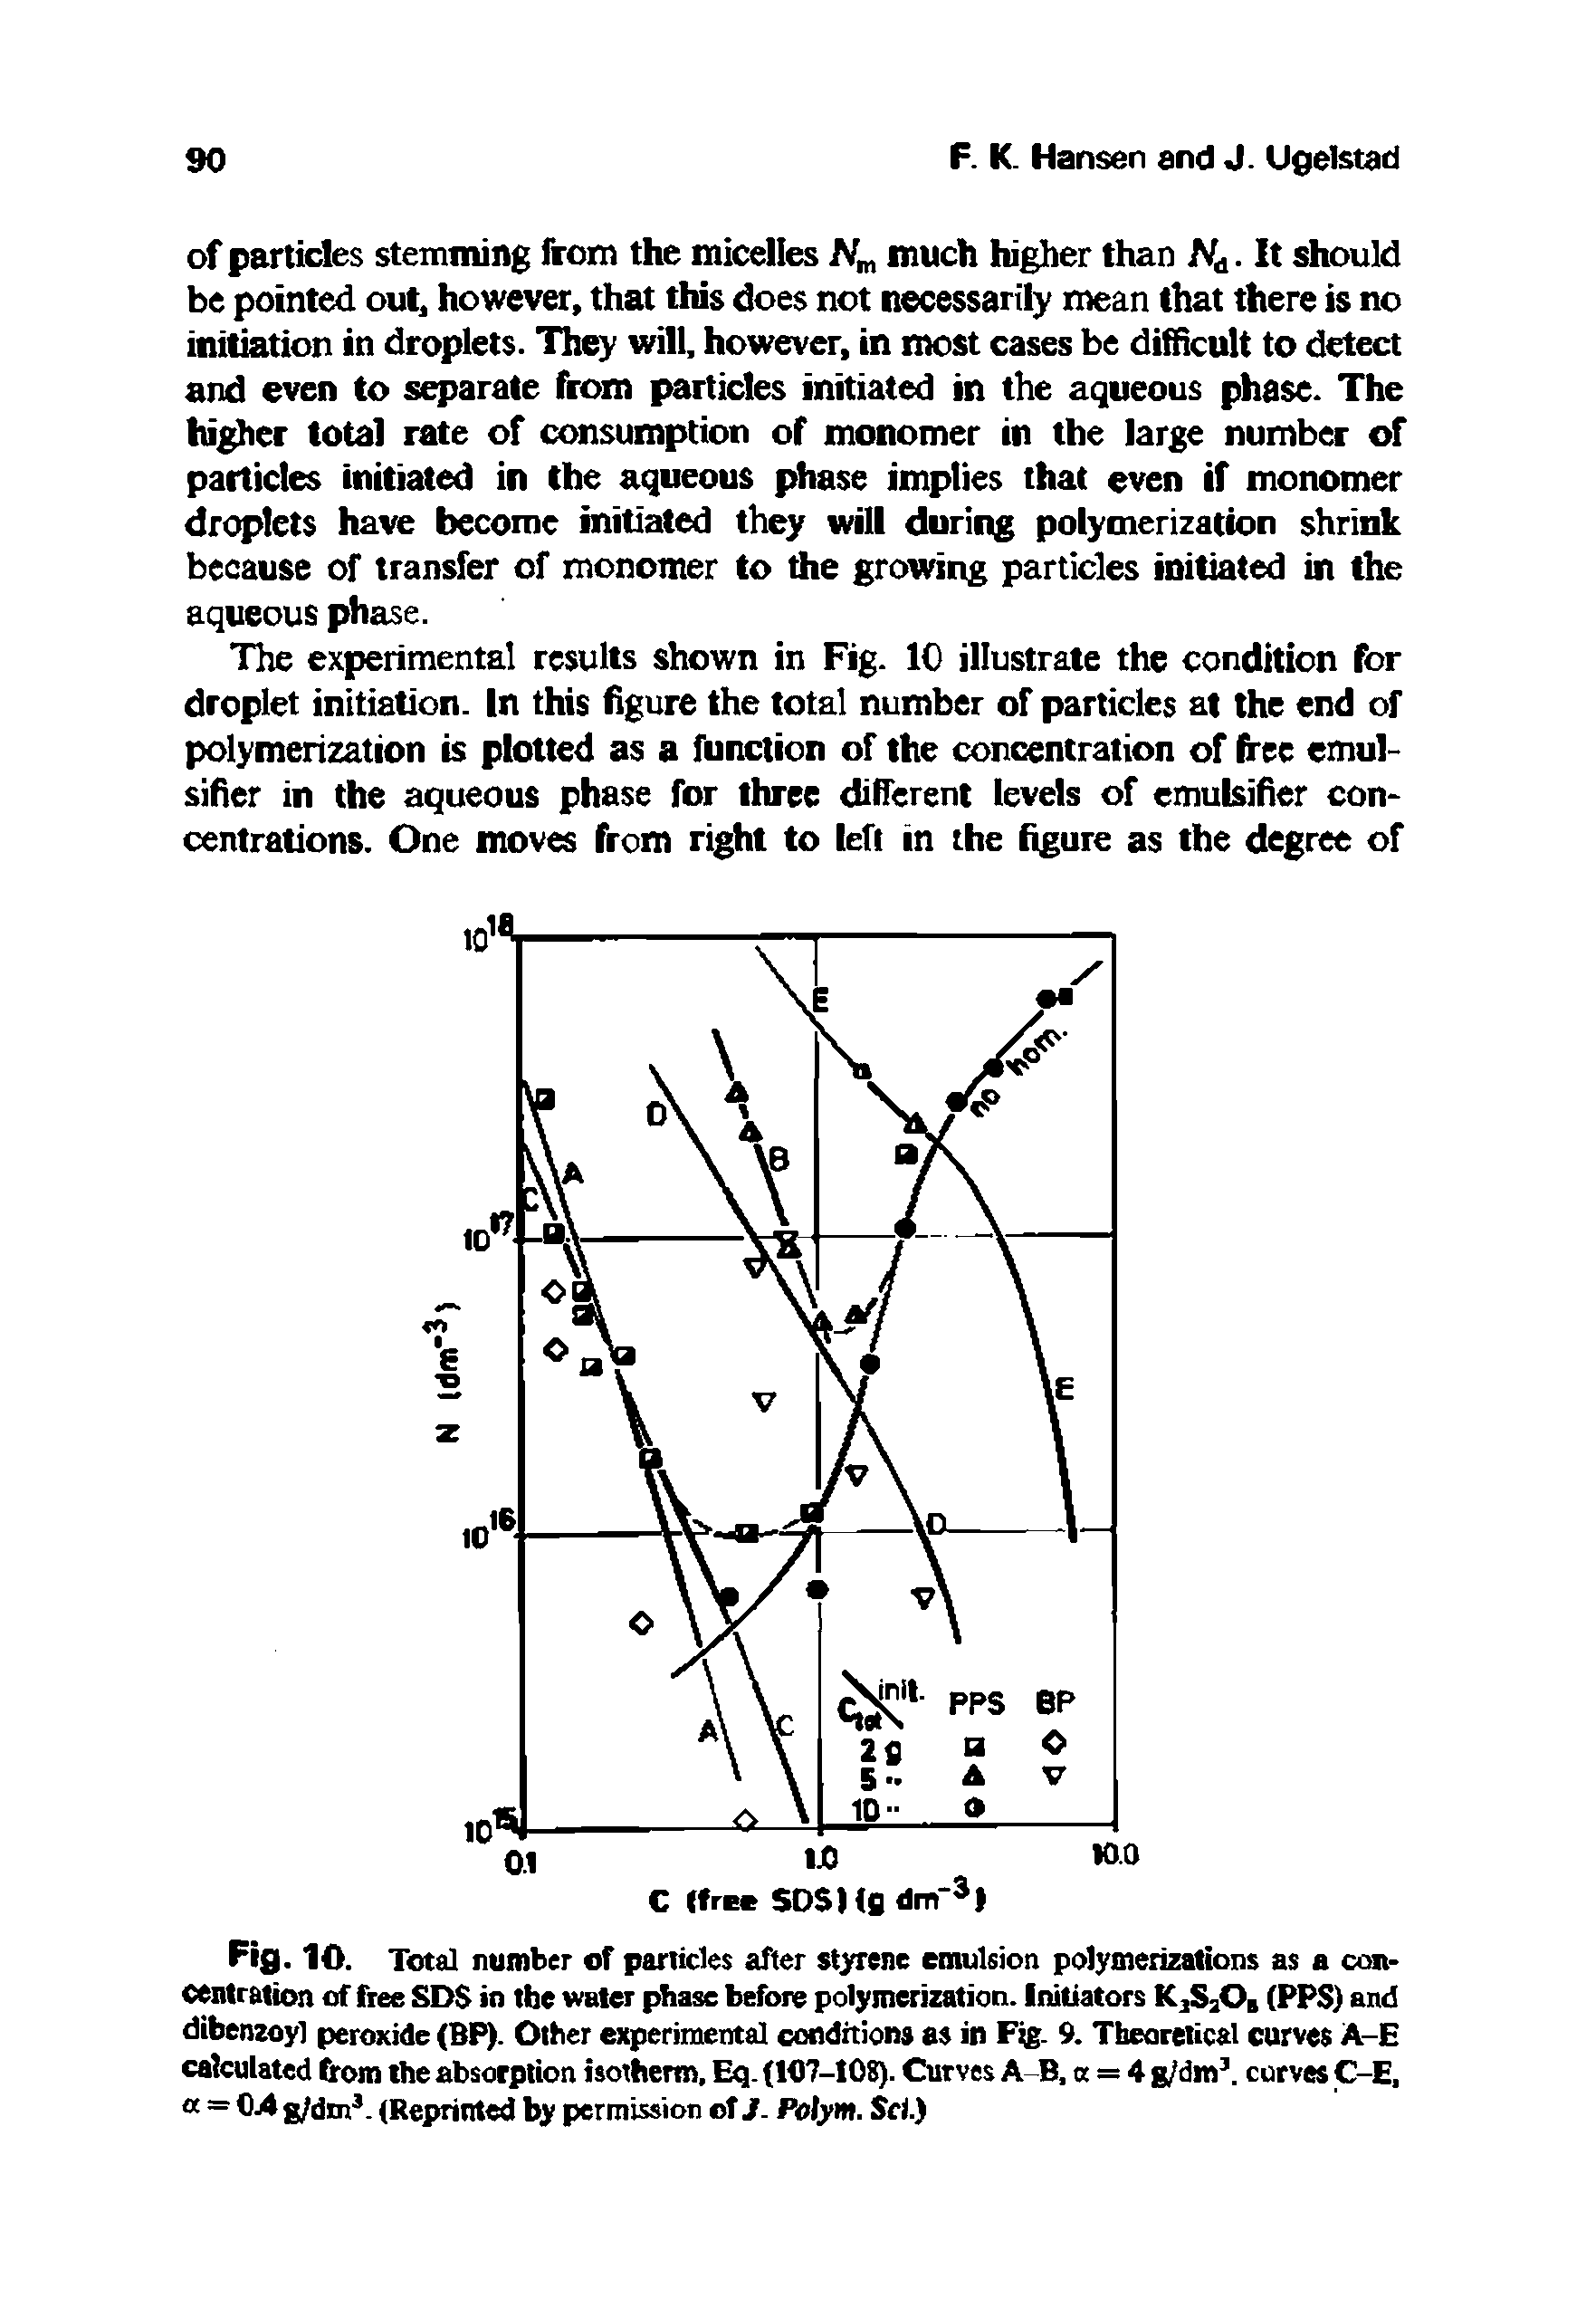 Fig. 10. Total number of panicles after styrene emulsion polymerizations as a concentration of free SD in the water phase before polymerization, initiators K,S20b (PPS) and dibenzoyl peroxide (BP). Other experimental conditions as in Fig. 9. Theoretical curves A-E calculated from the absorption isotherm, Eq. (107-108). Curves A-B, a = 4 g/dm . curves C-E, a = OA g/dm. (Reprinted by permission of J. Polym. Sci.)...